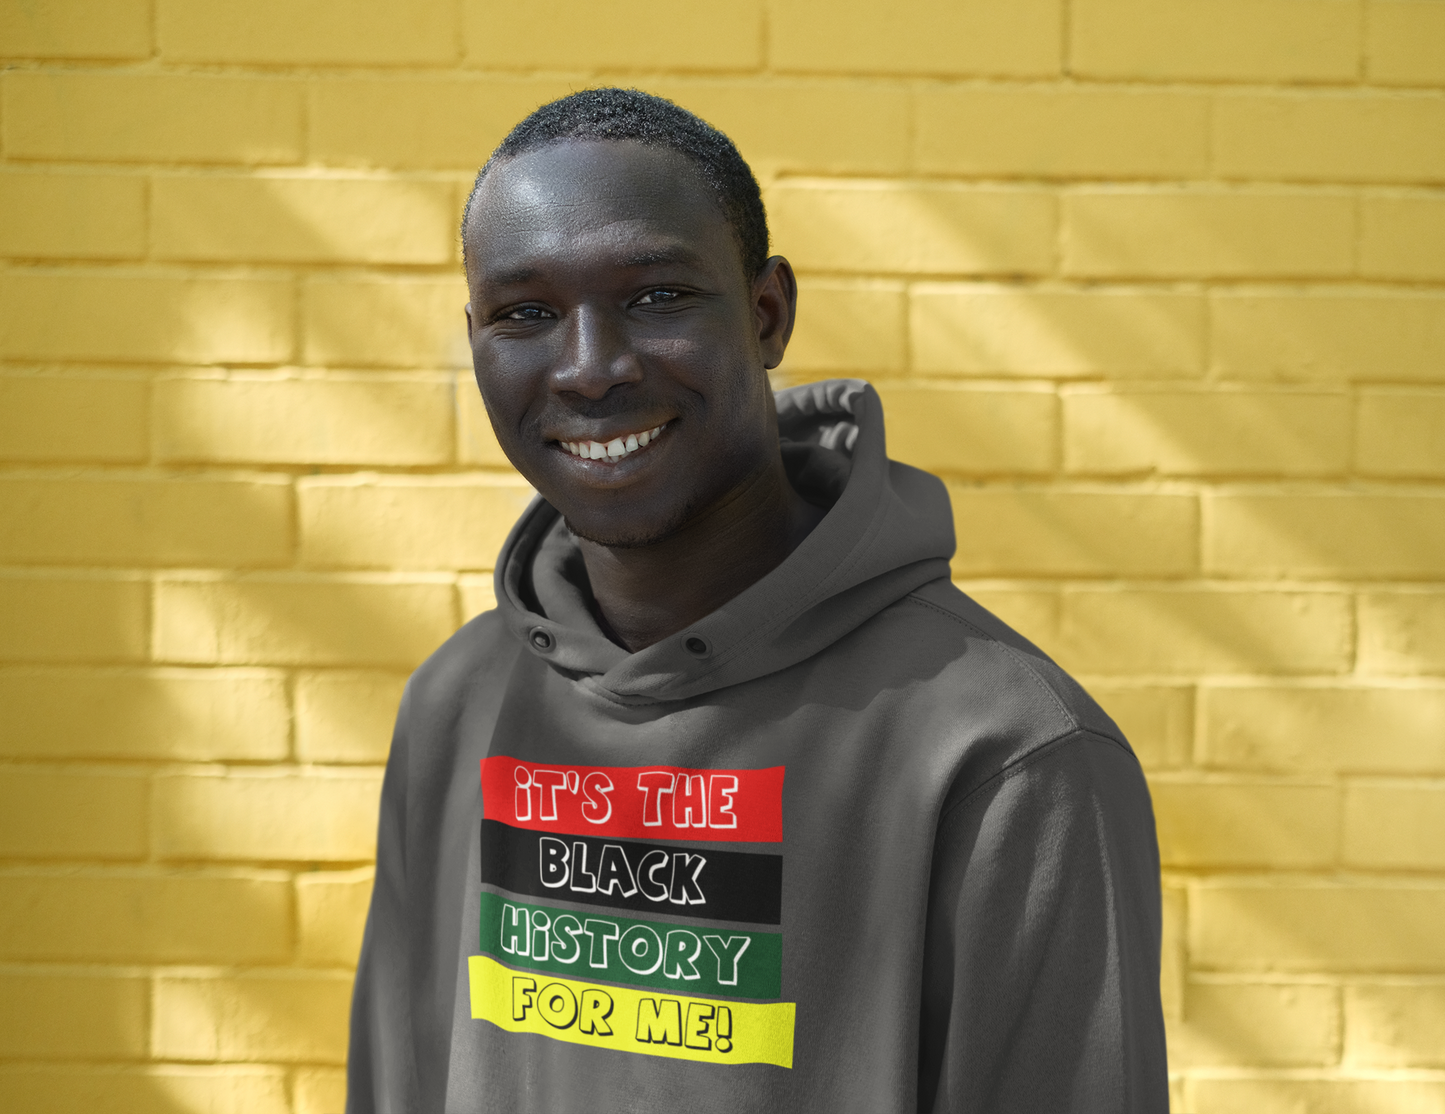 It's The Black History For Me Hoodie